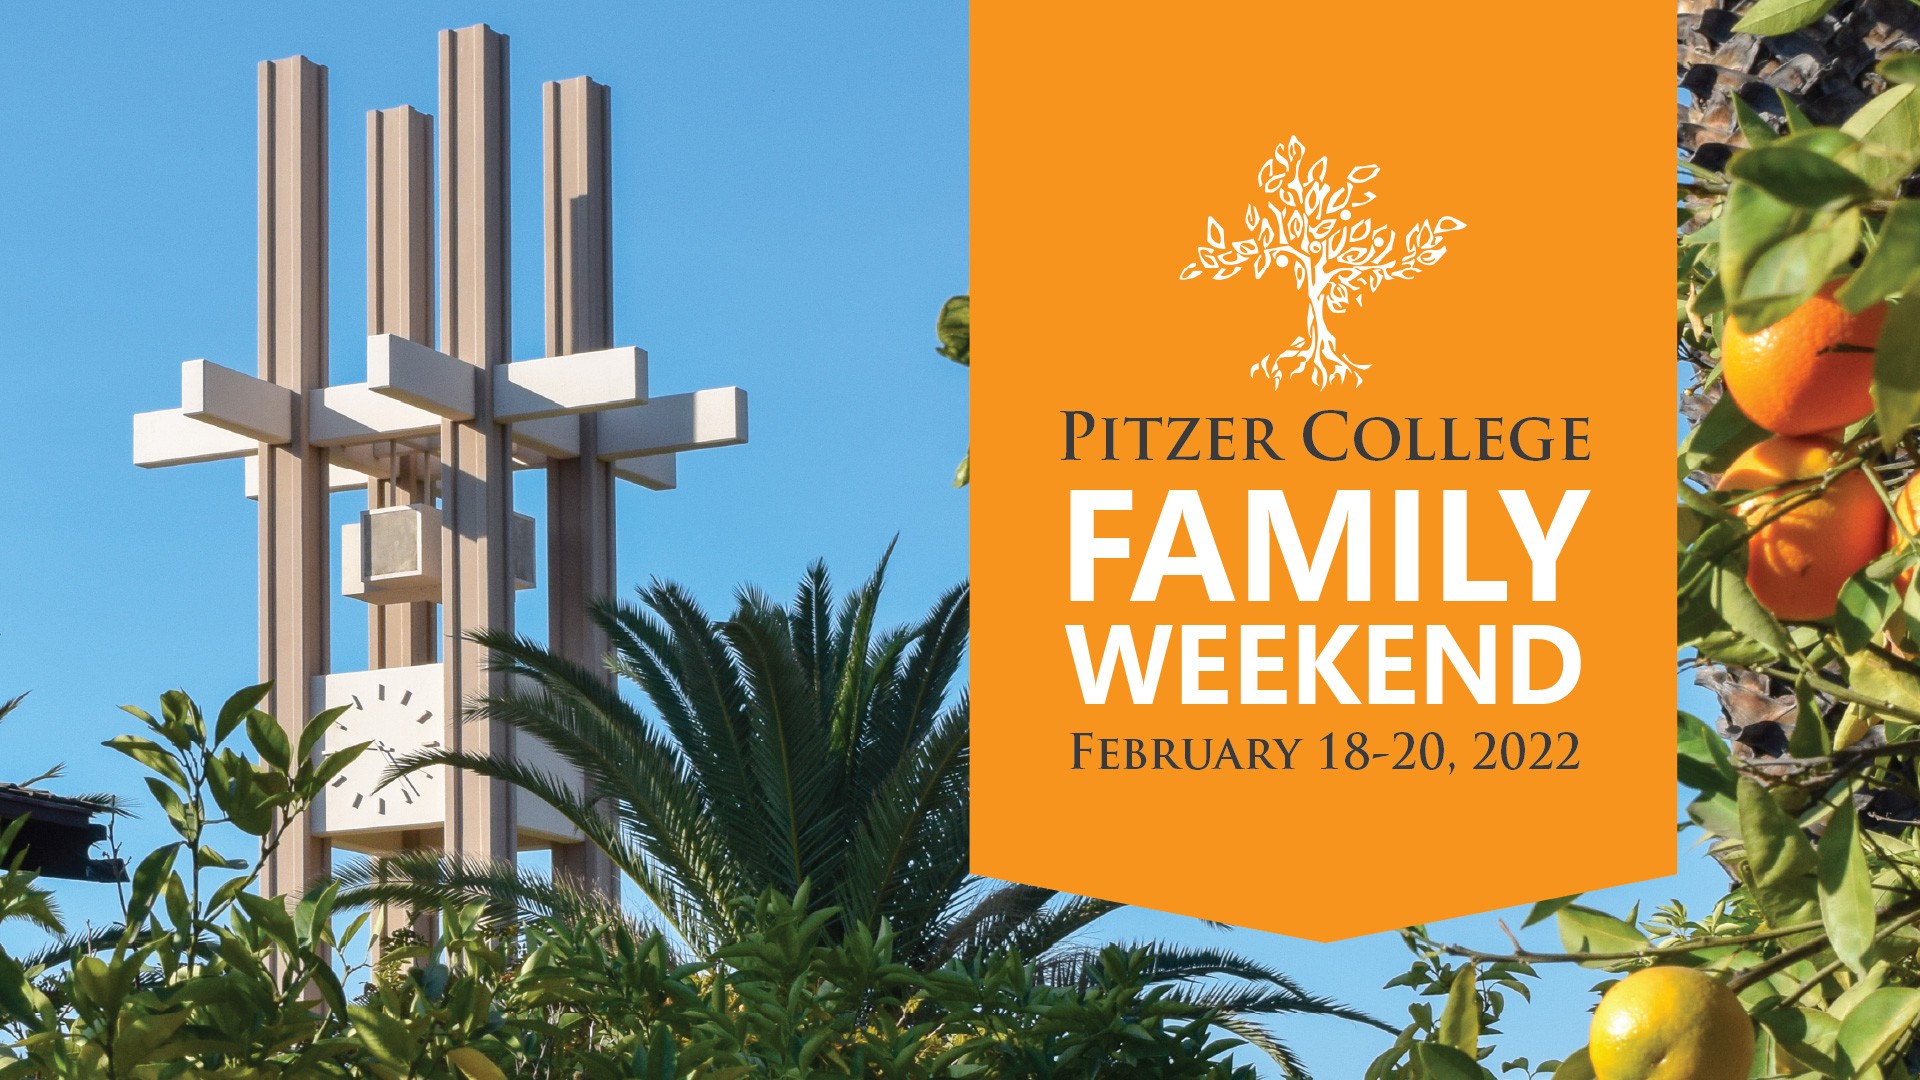 Pitzer College Calendar 2022 Family Weekend 2022 - Pitzer College